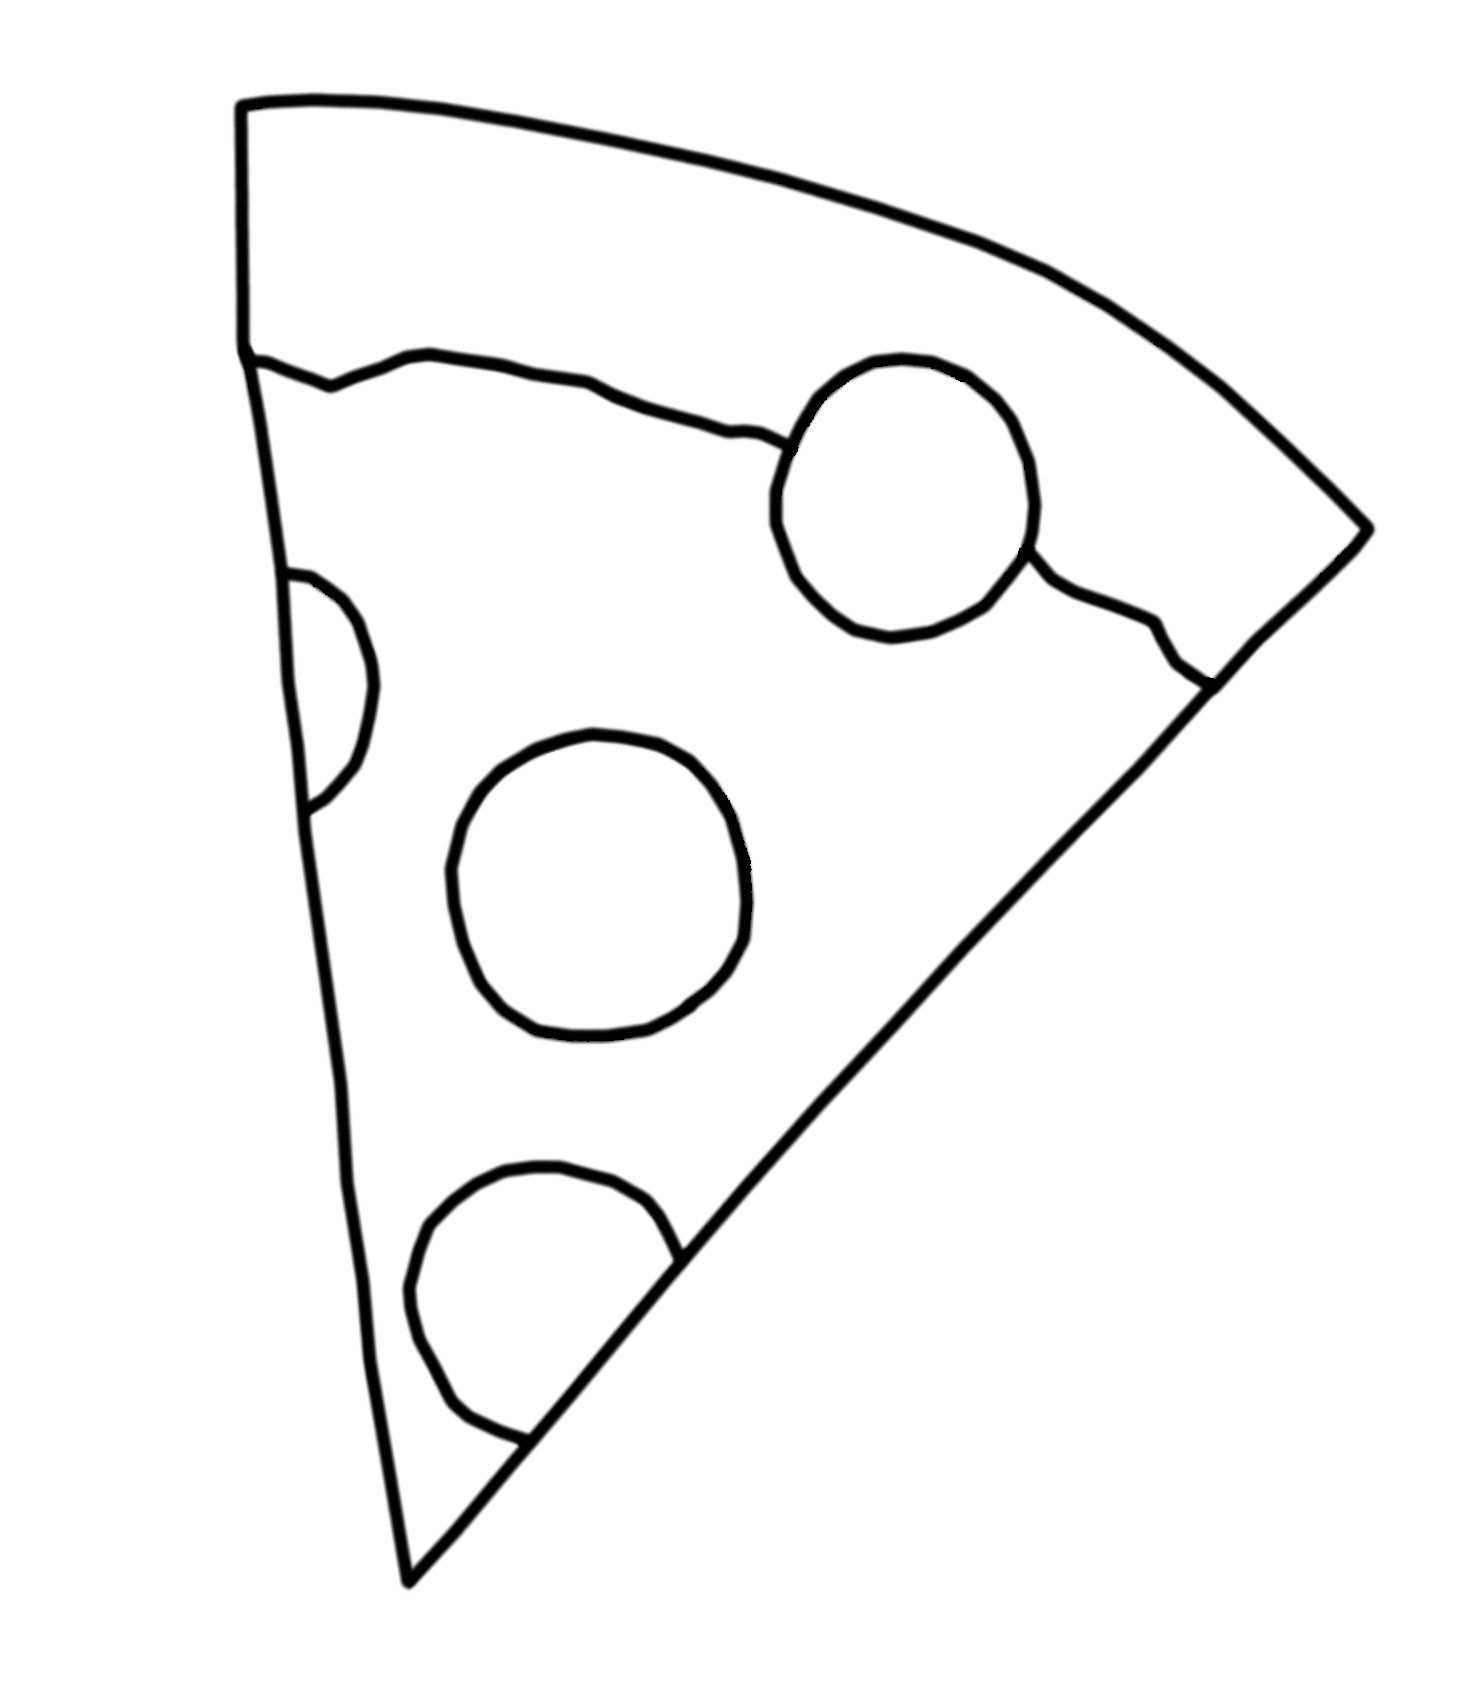 Coloring Page Pizza Slice By Blackcatstitchcrafts On Etsy With